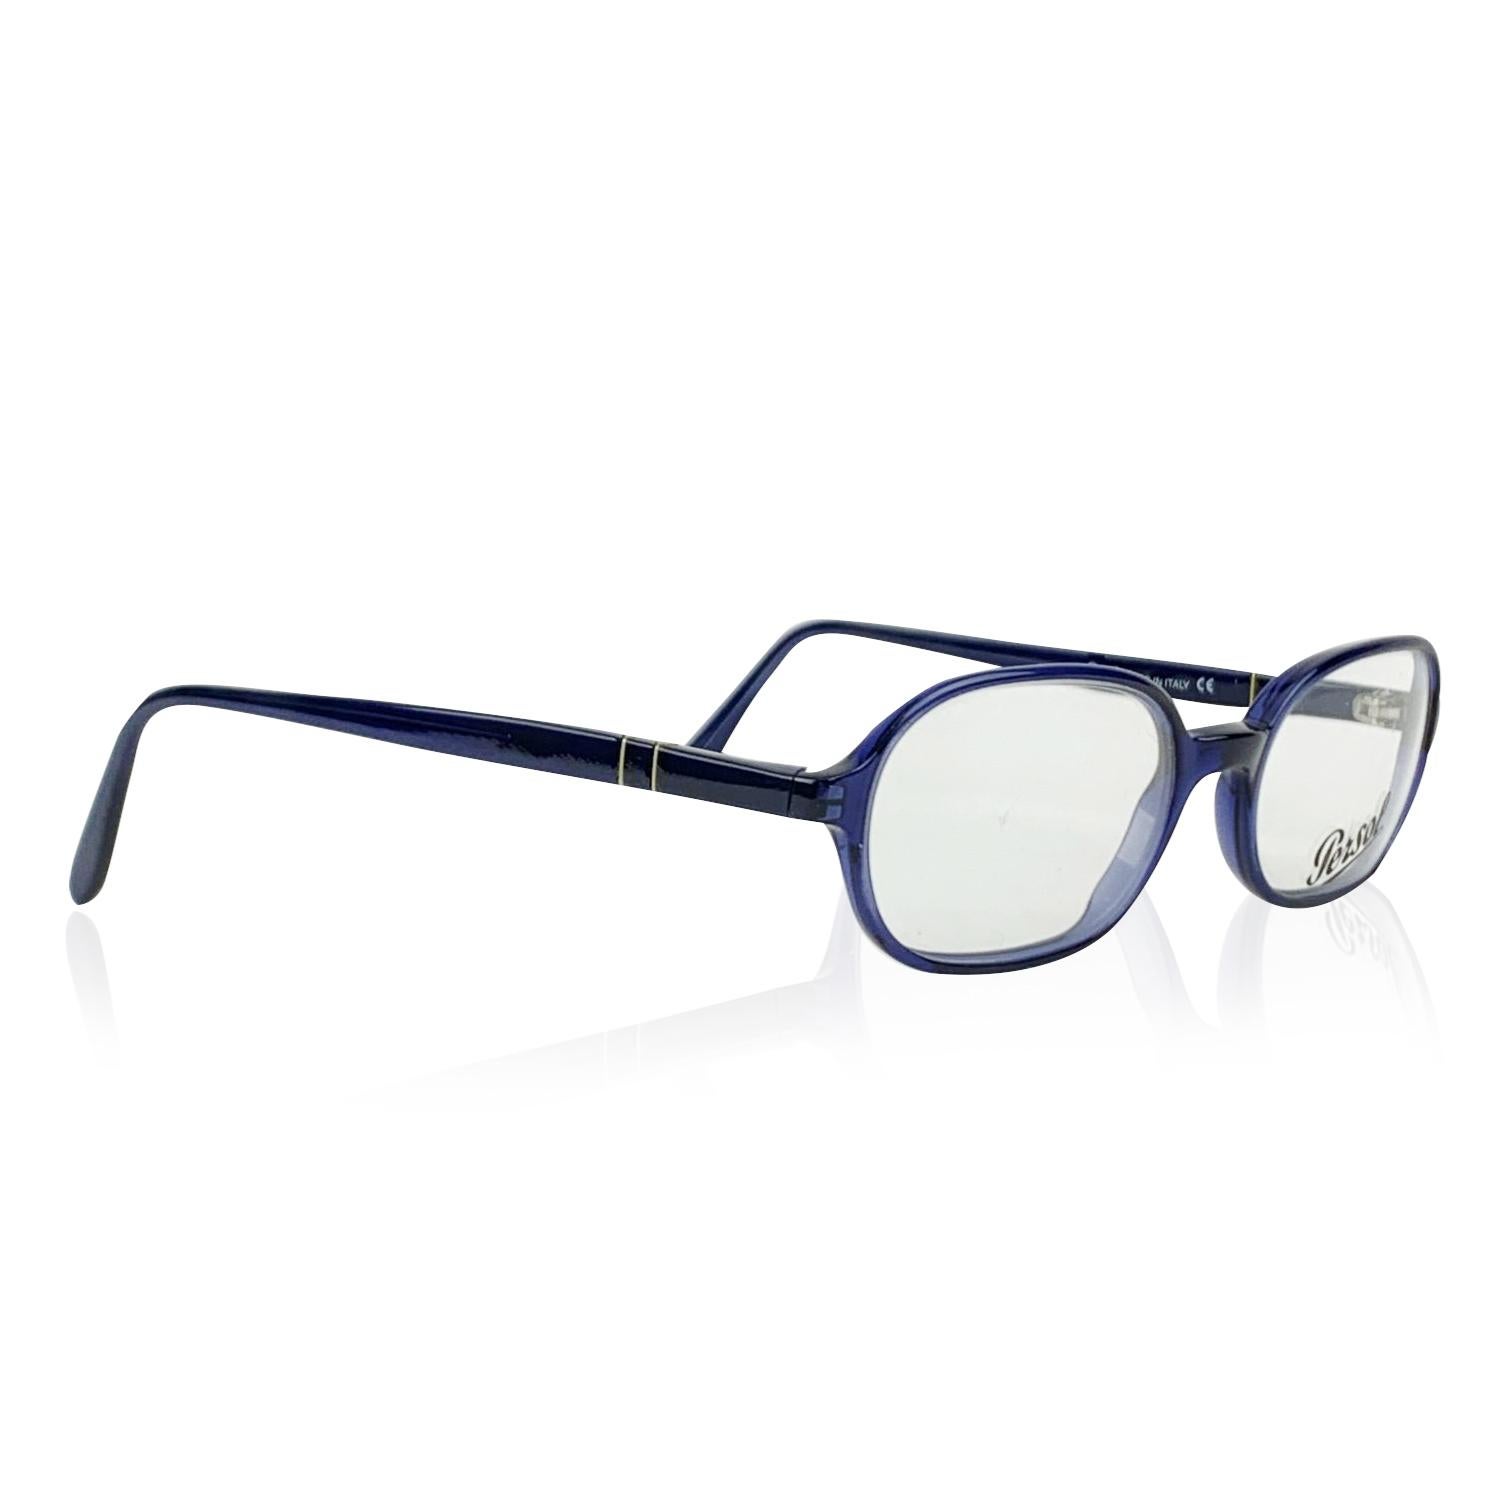 PERSOL Vintage Eyeglasses- Model: 2560-V. Blue acetate frame. Clear demo lenses. Meflecto System on arms (2 metal pins which are inserted vertically into the ear stems and provide flexibility in the stems). Made in Italy. Style & Refs: 2560-V -